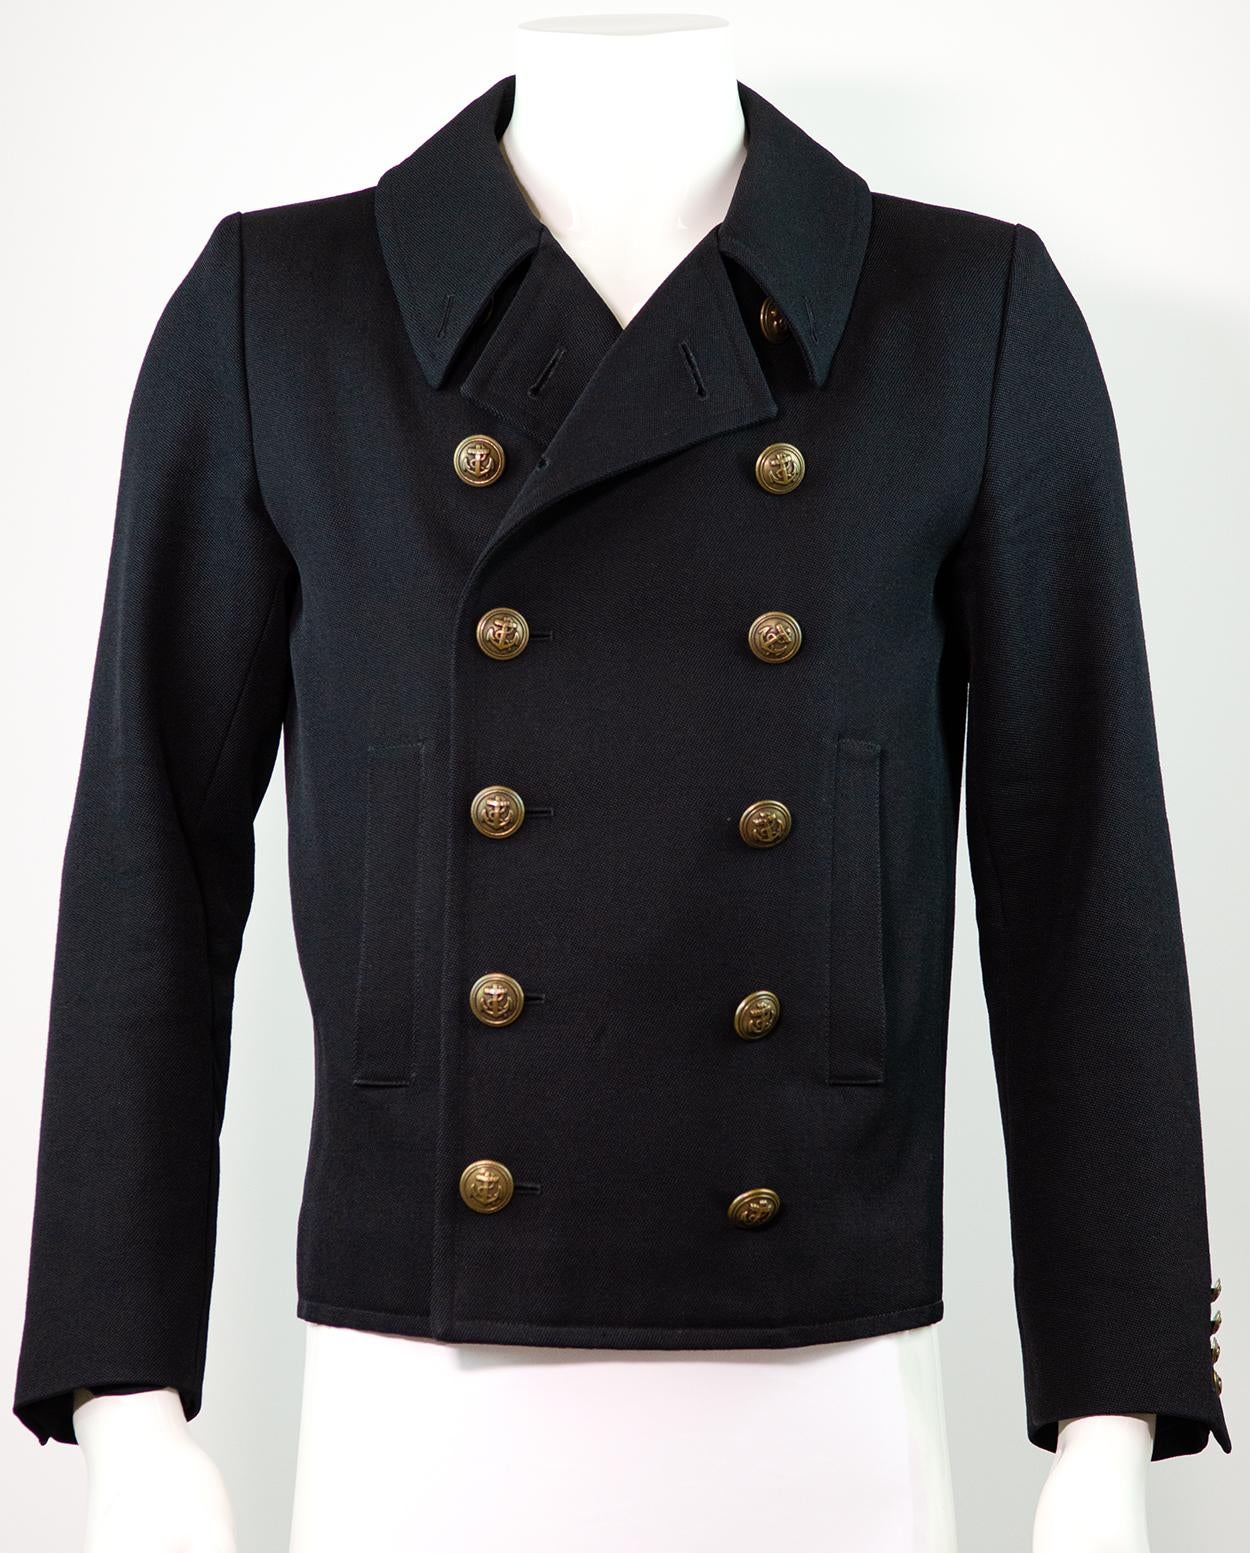 SAINT LAURENT By HEDI SLIMANE F/W 2013 Military Style Jacket  For Sale 3